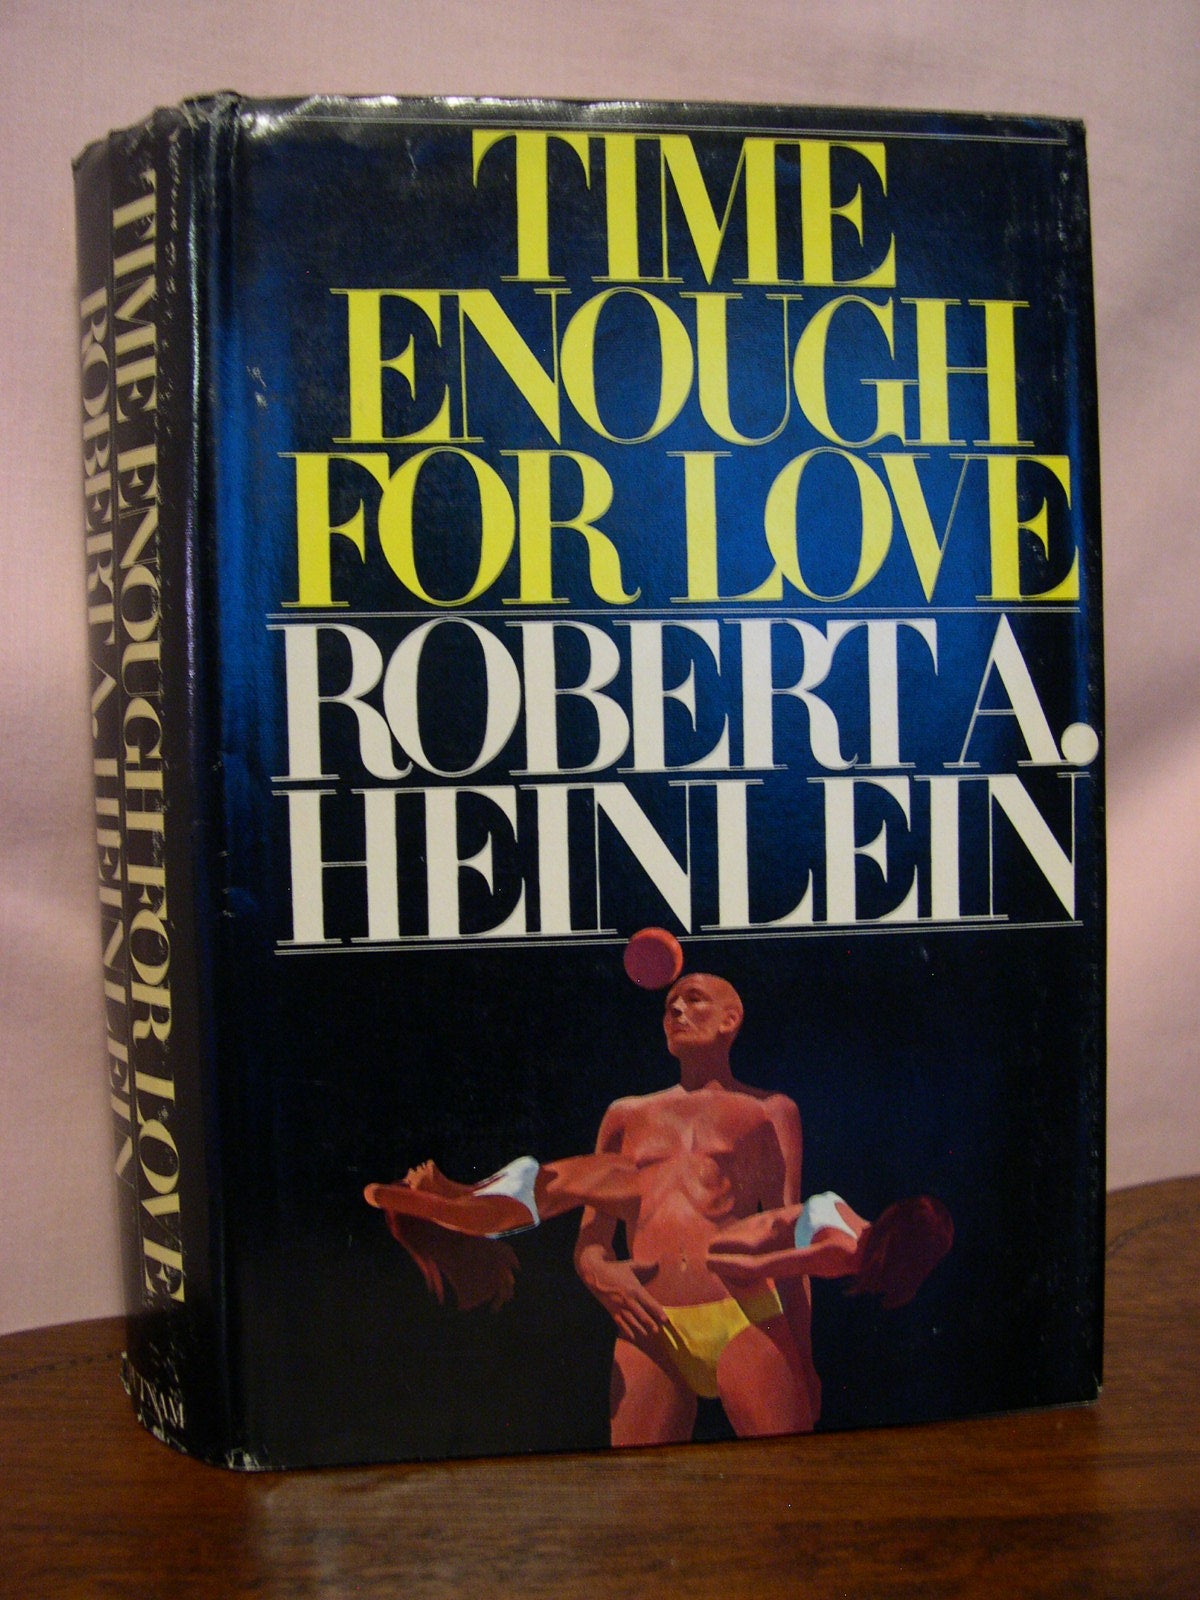 FOR LOVE: THE LIVES OF LAZARUS LONG | Robert A. Heinlein | First edition, first printing